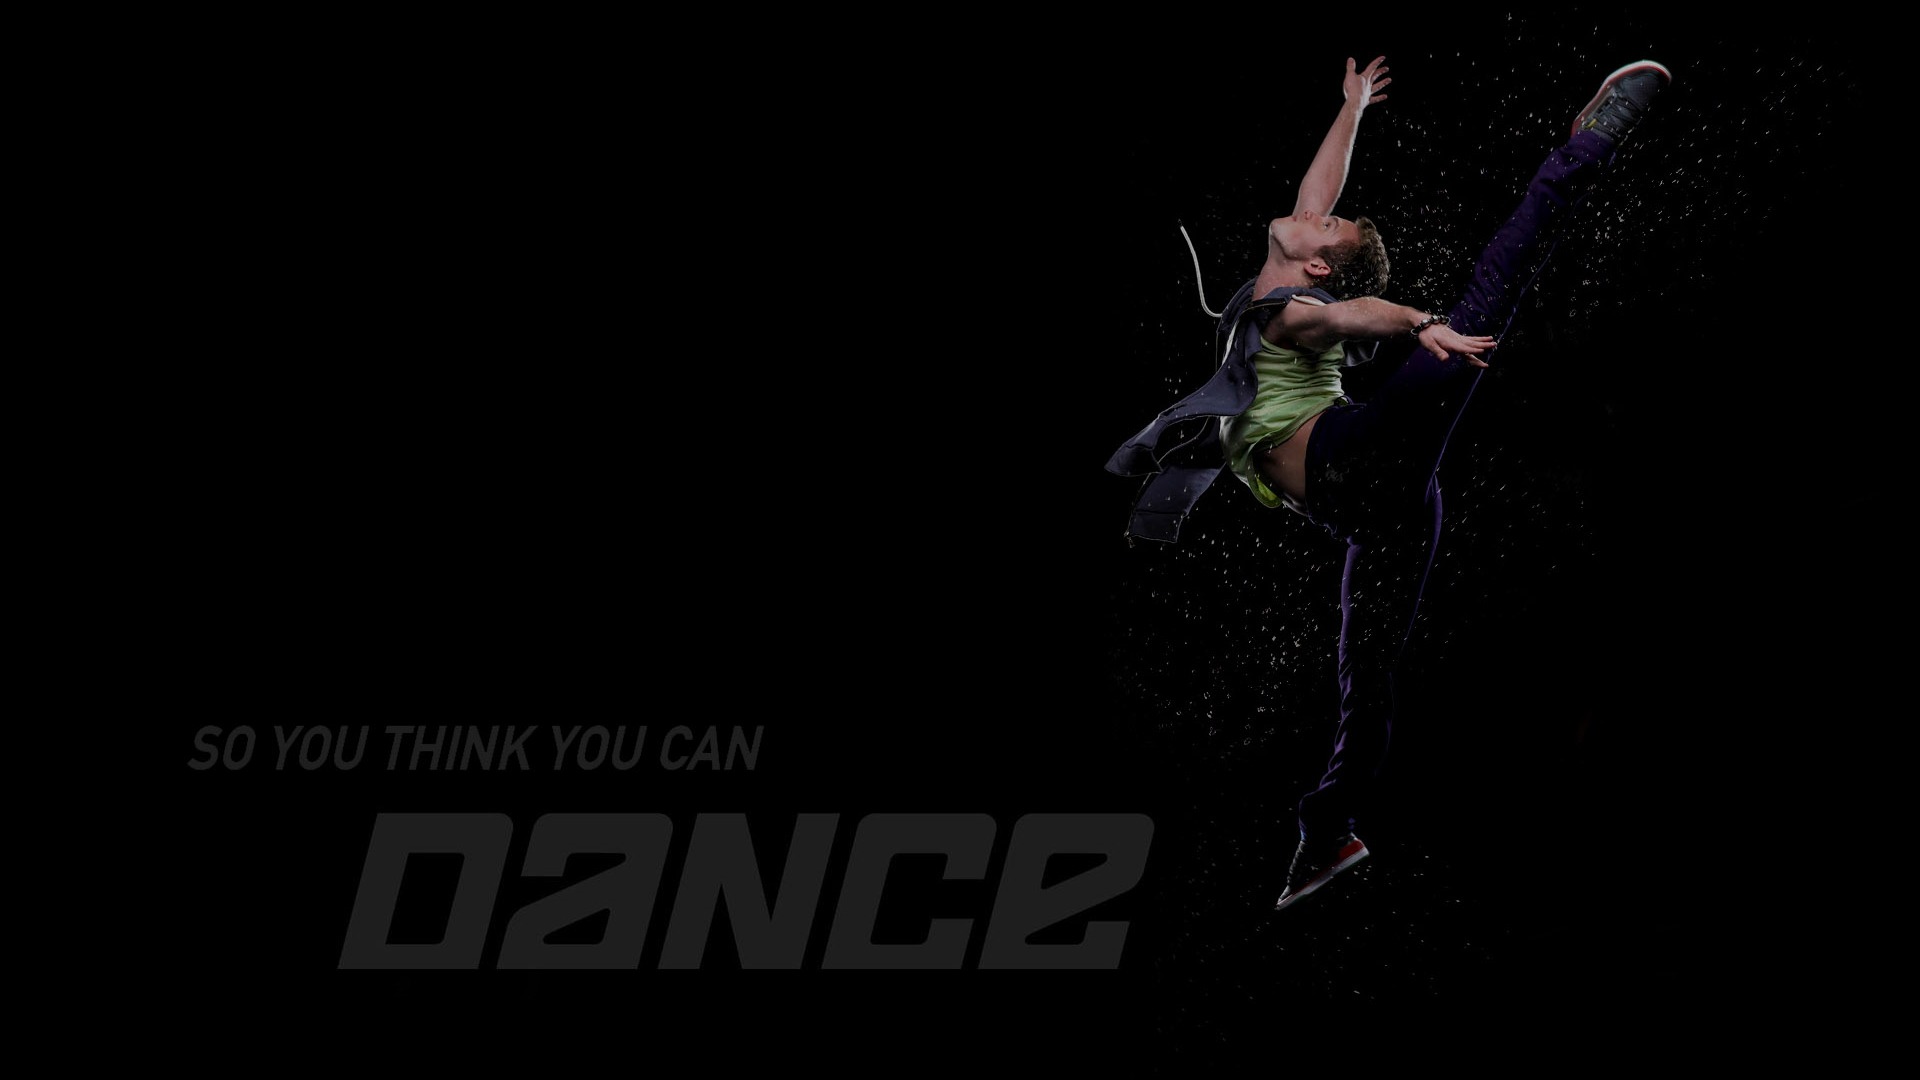 So You Think You Can Dance 舞林争霸 壁纸(二)8 - 1920x1080